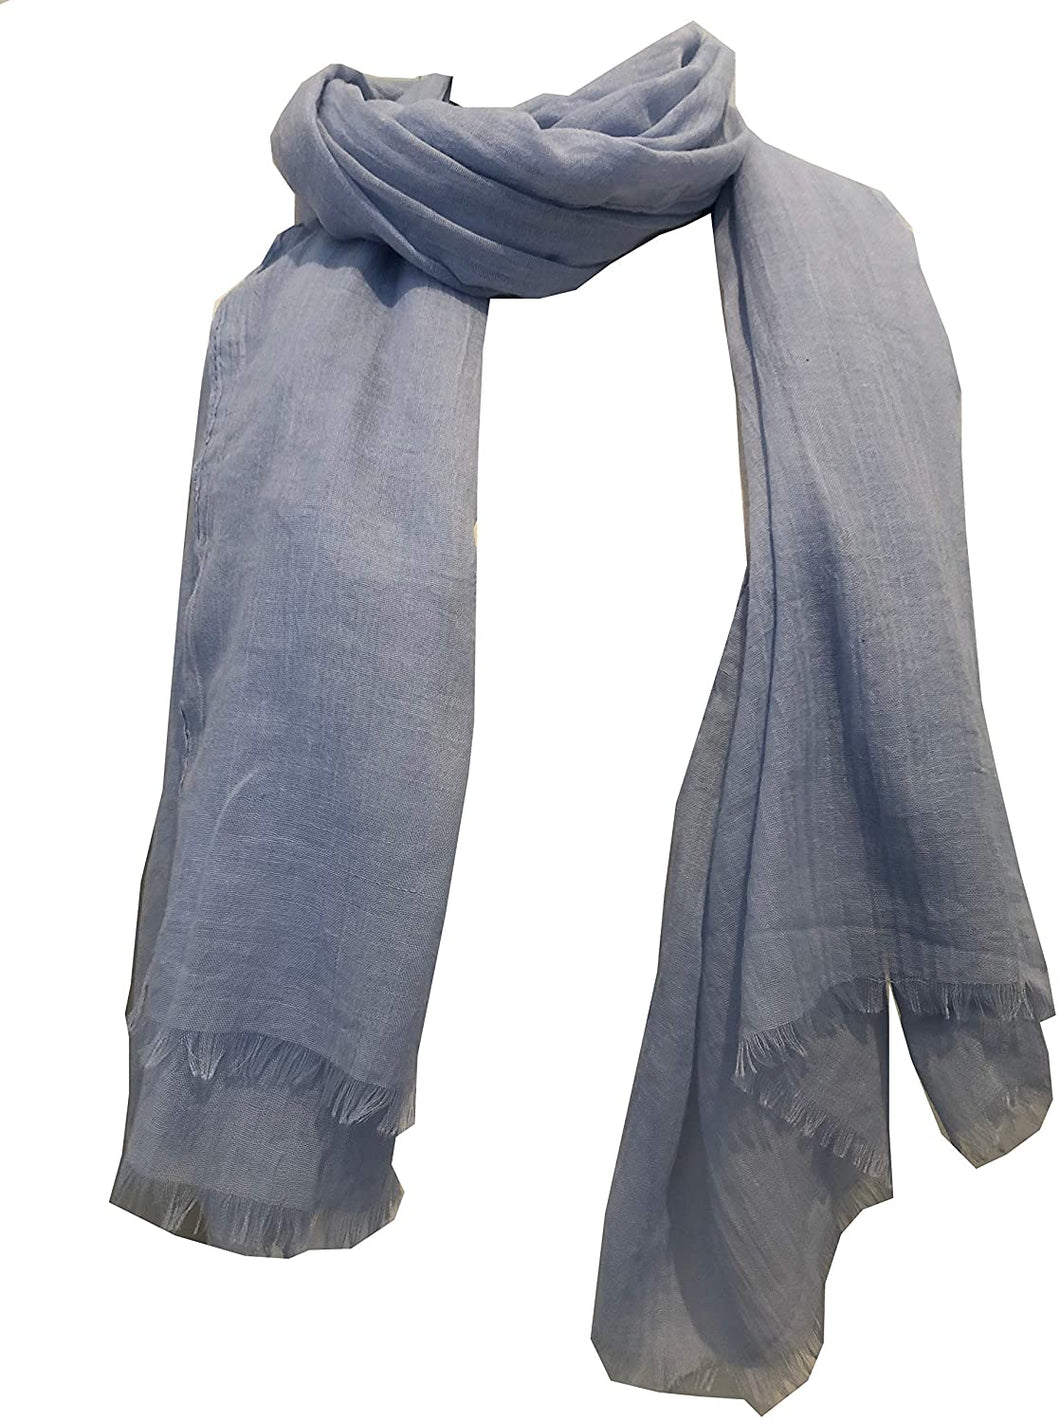 Pamper Yourself Now Sky Blue Plain Soft Long Scarf/wrap with Frayed Edge